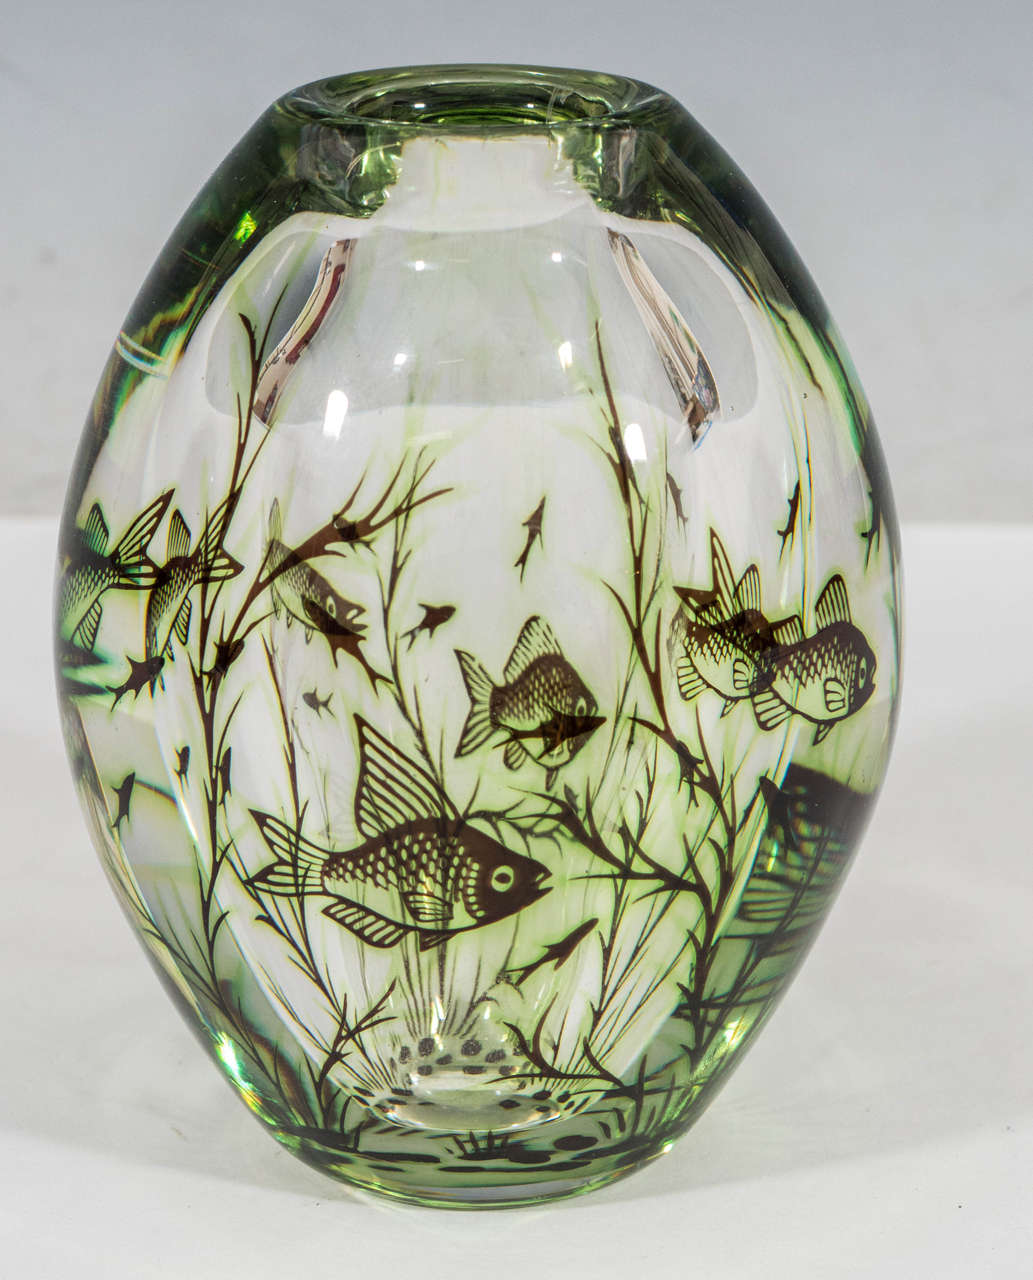 A vintage glass vase, rendered using 'graal' technique (twice-blown), with depictions of floating fish among seaweed. Produced circa 1960's by artist Edward Hald for Orrefors of Sweden. Maker's mark and artist's signature etched on bottom. Excellent